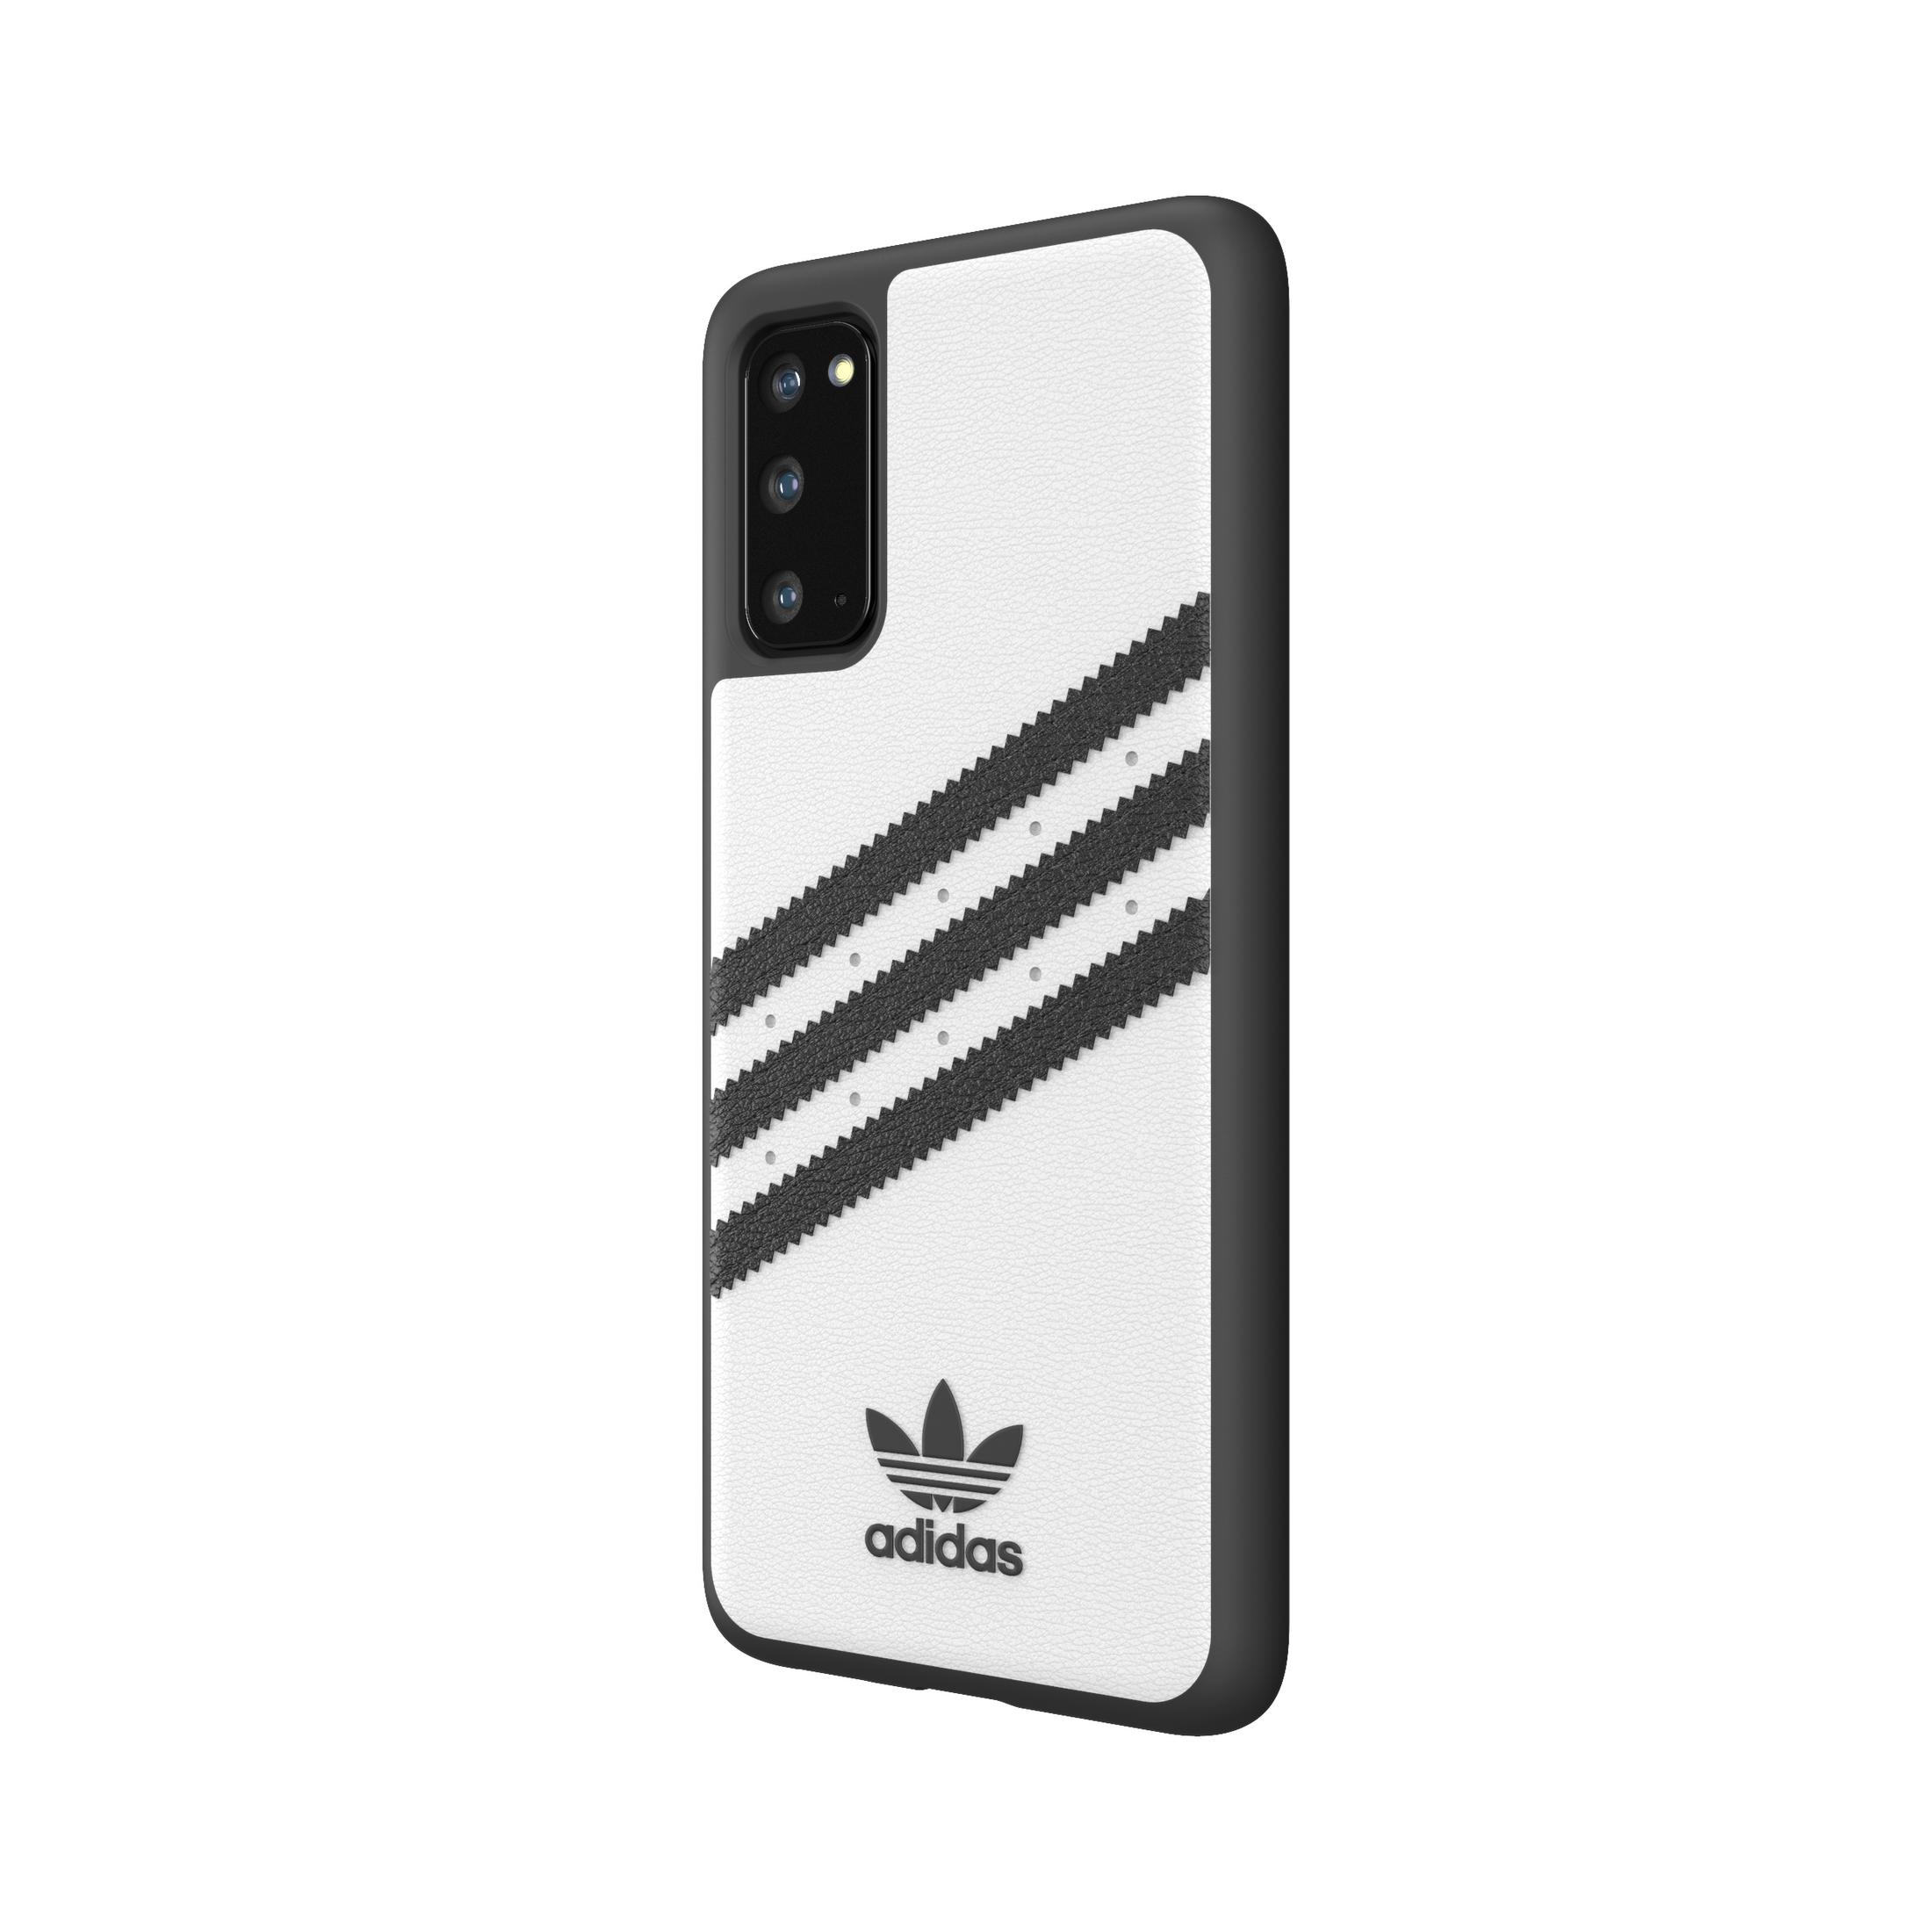 S20, ADIDAS PU, WHITE SAMSUNG, case Backcover, Moulded GALAXY